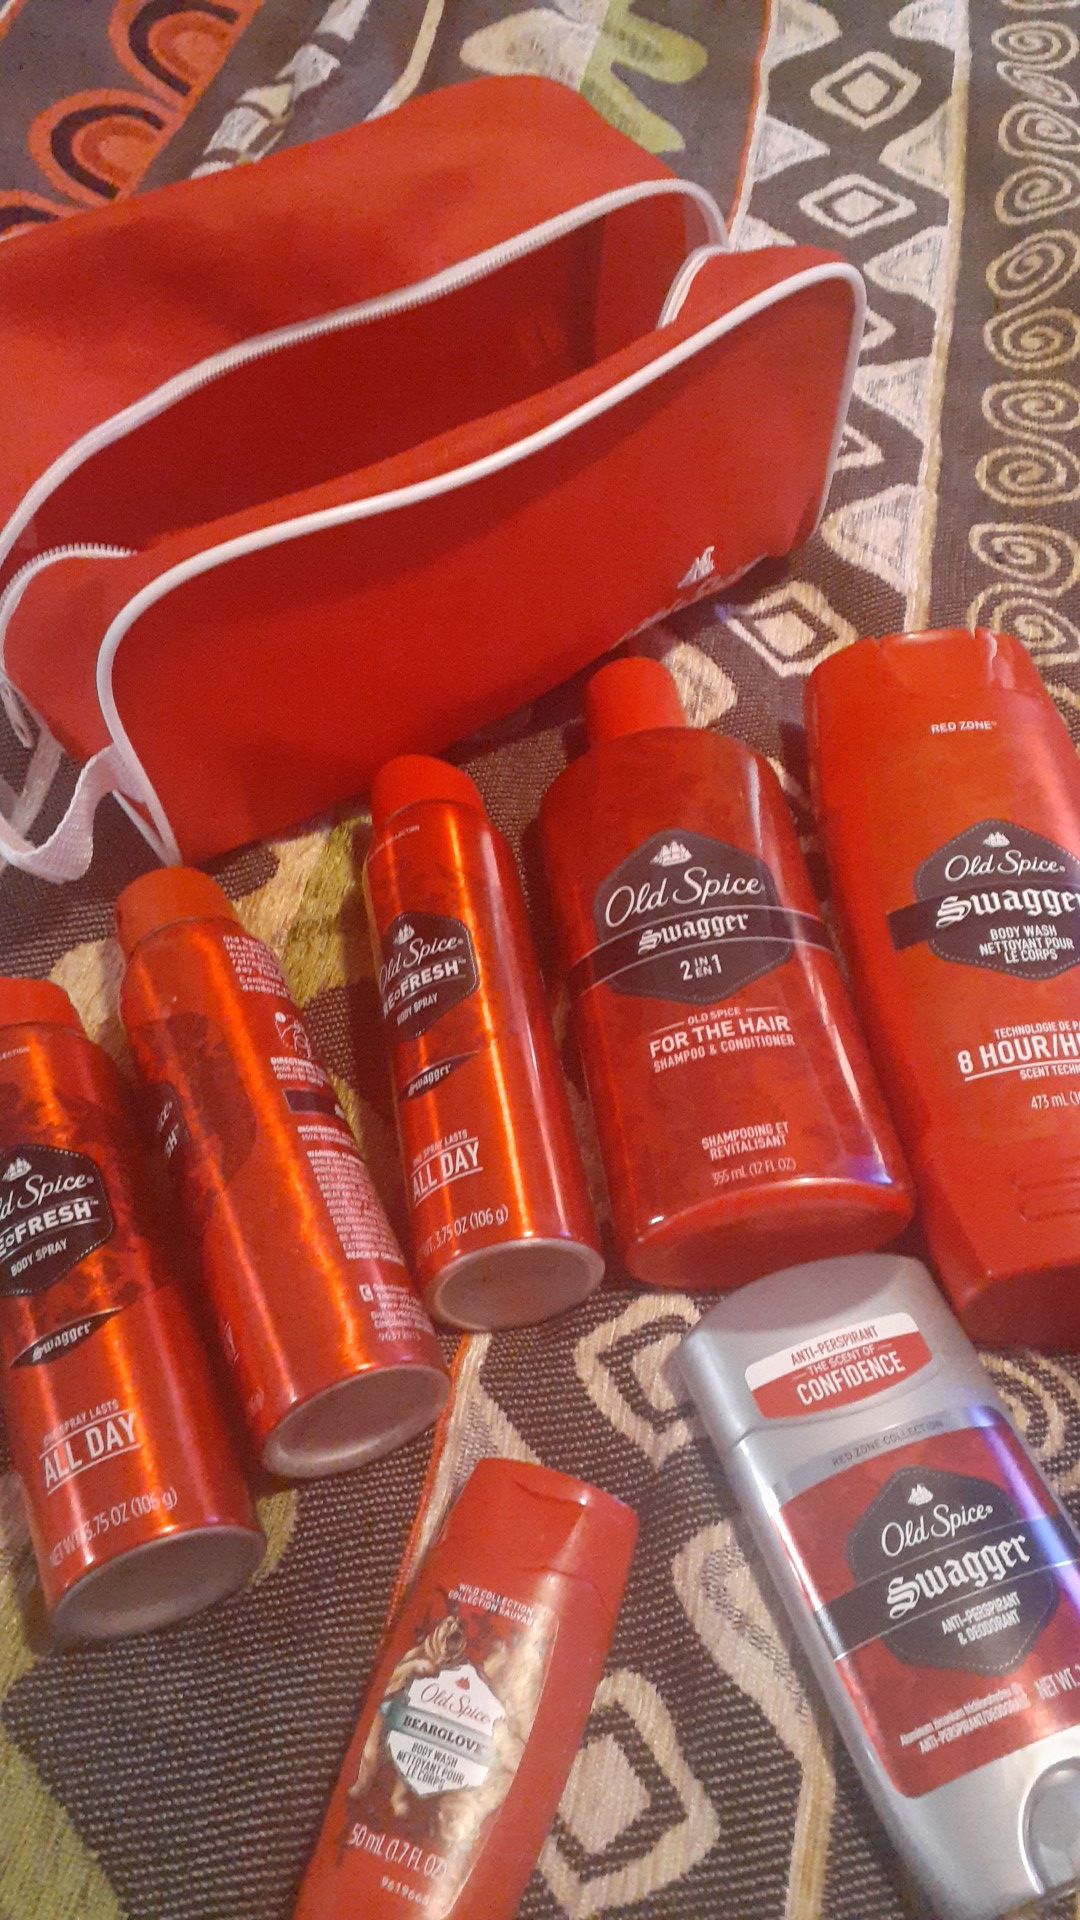 Old spice swagger